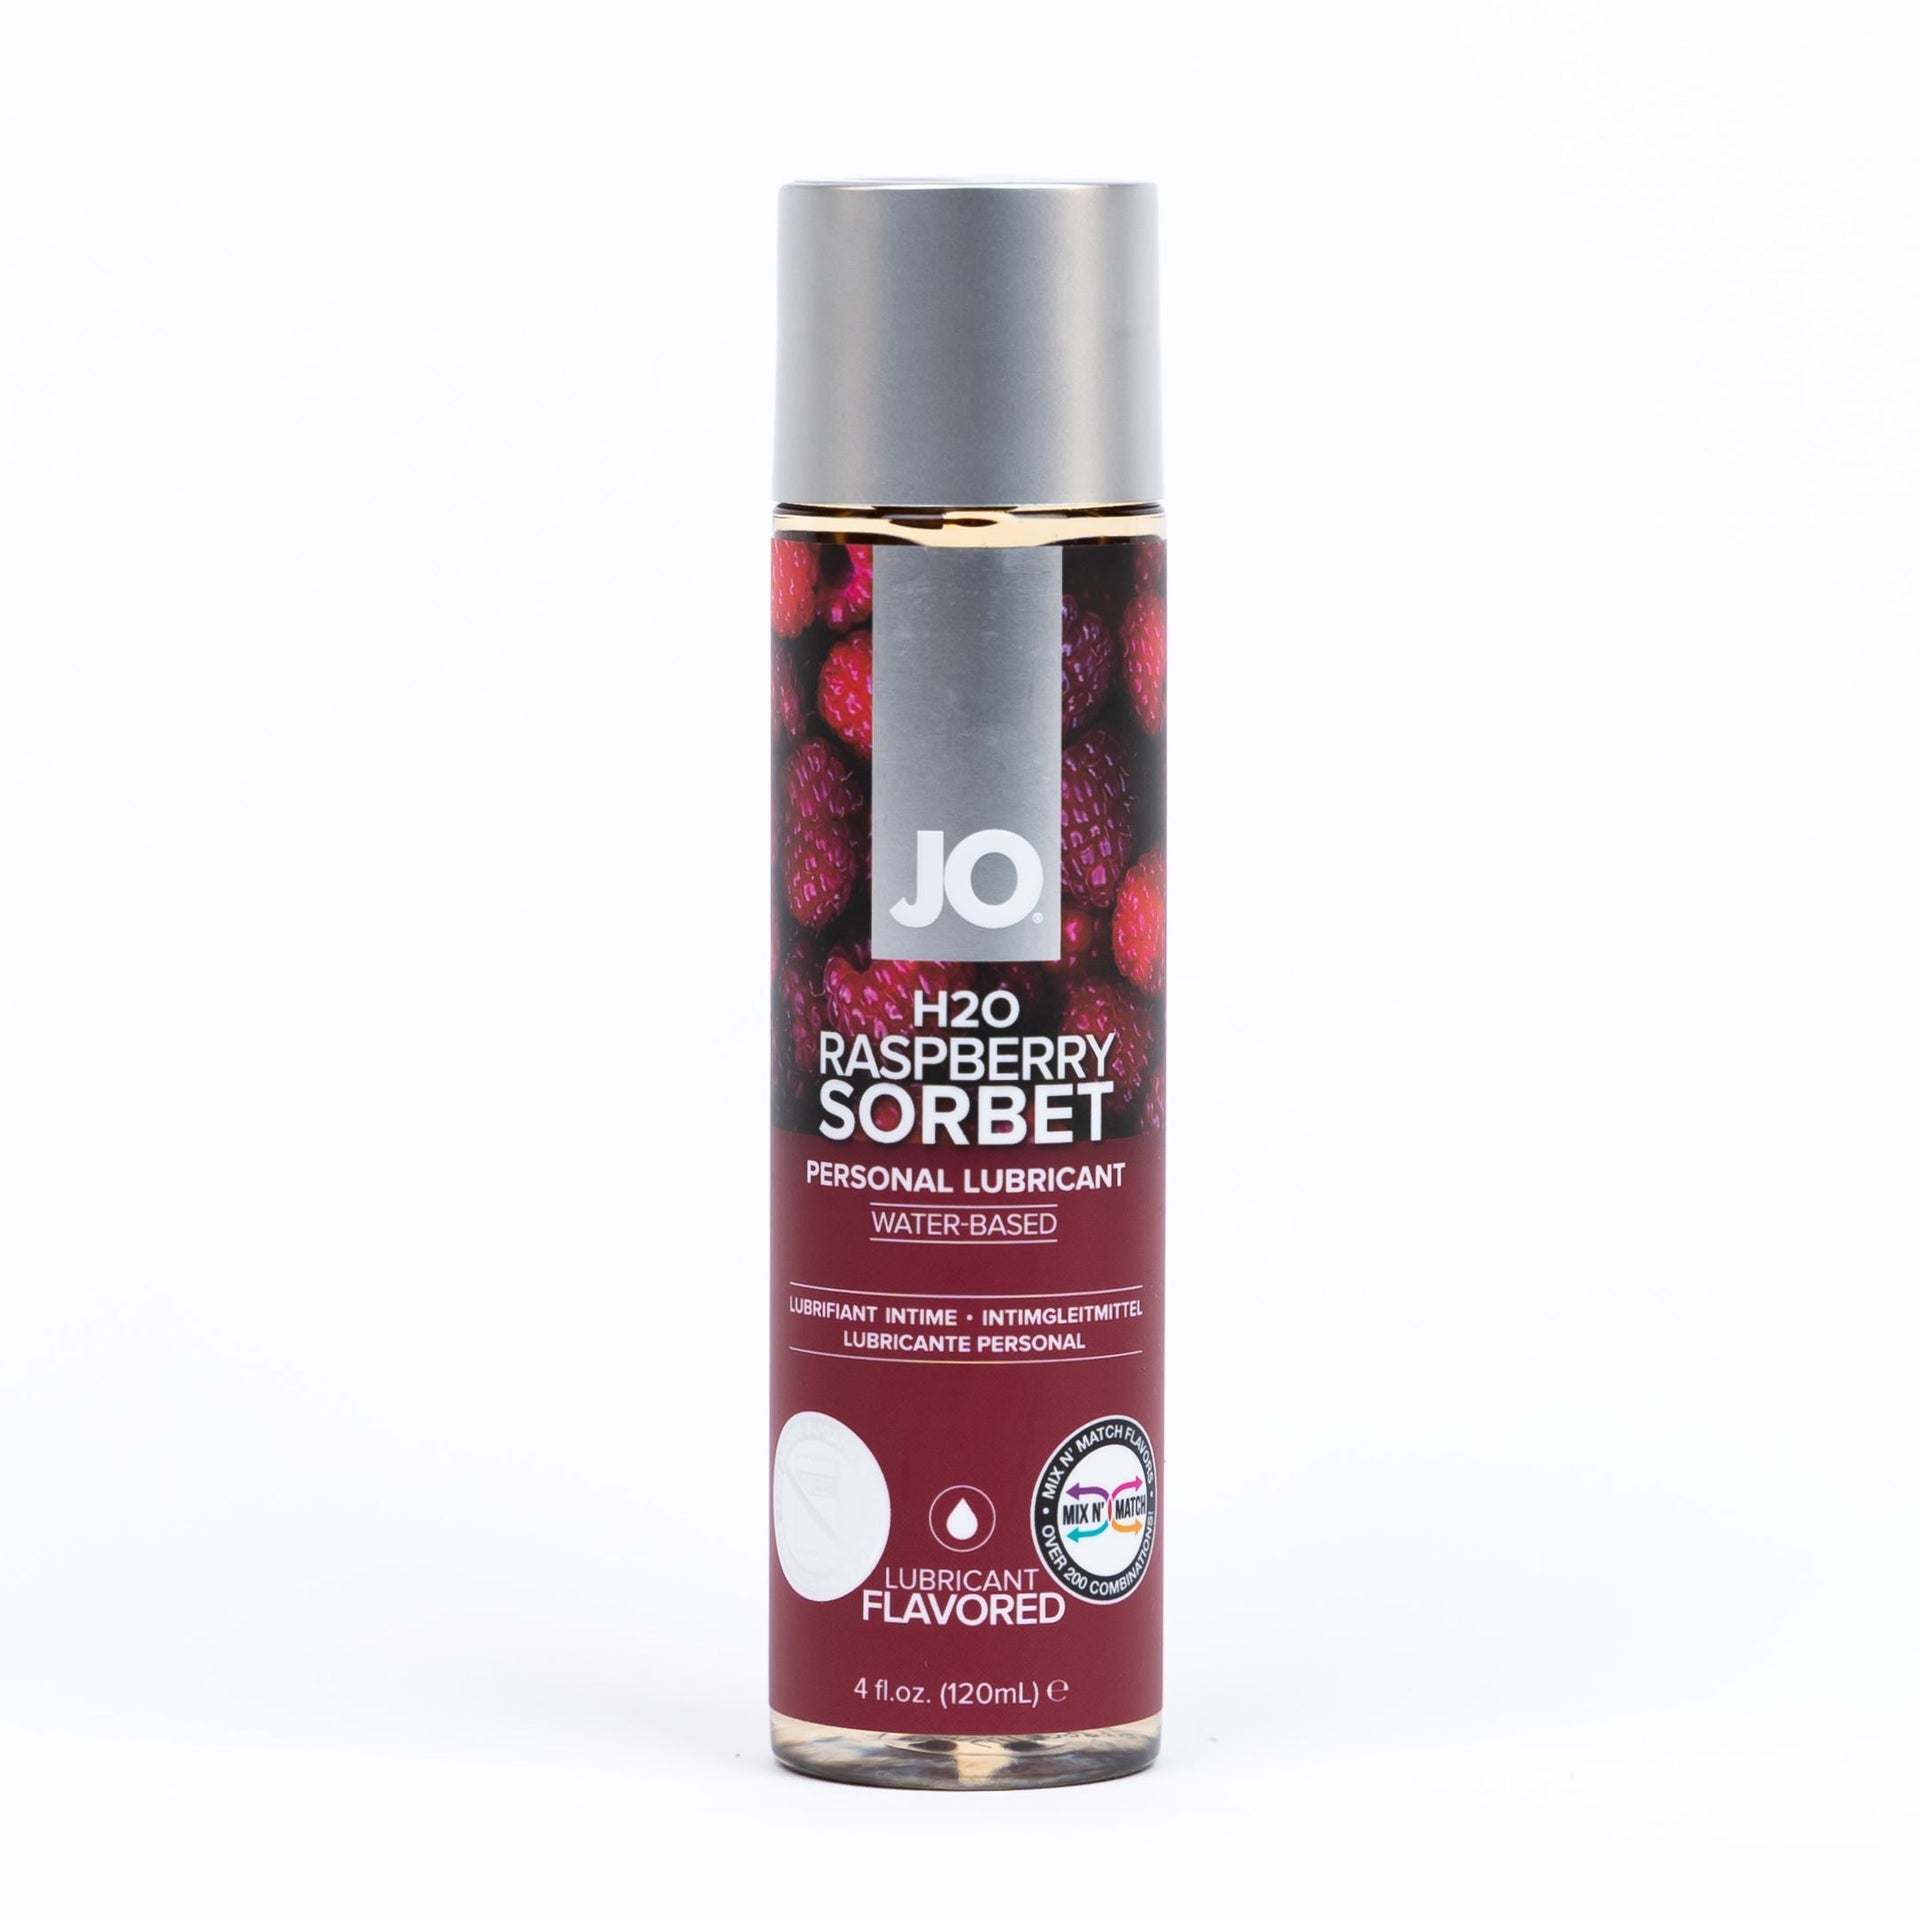 h20 raspberry sorbet lubricant front of pack